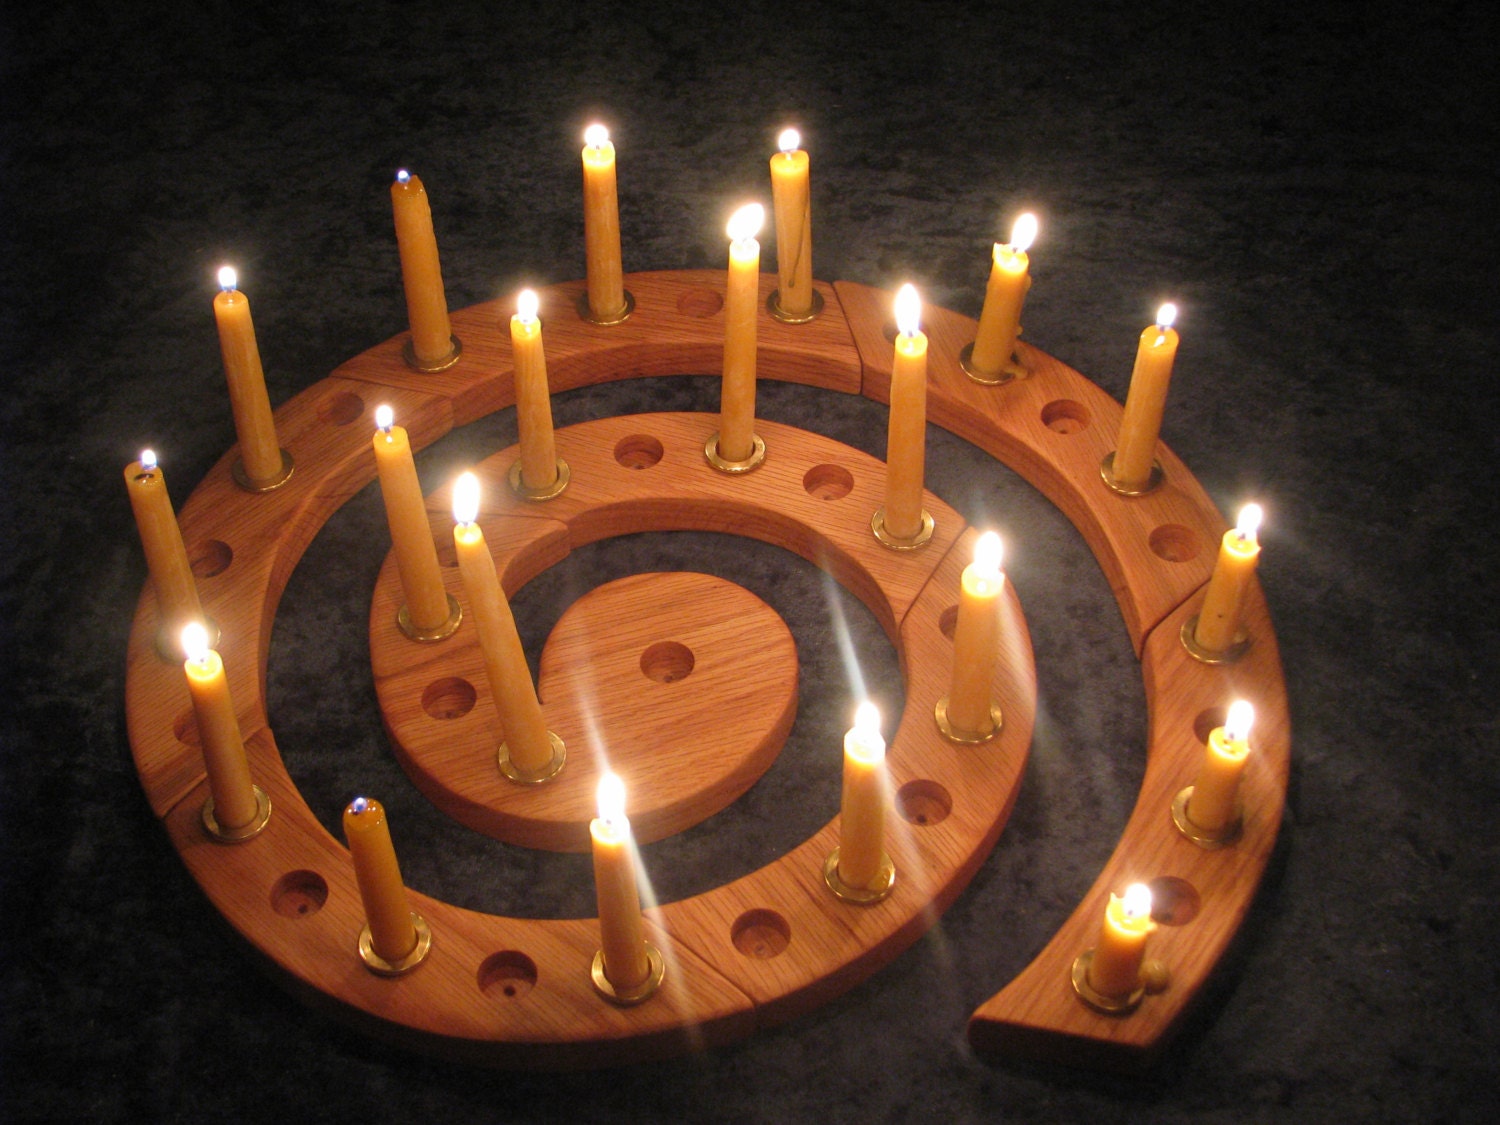 Celebration Spiral for Lent Advent and Birthday's